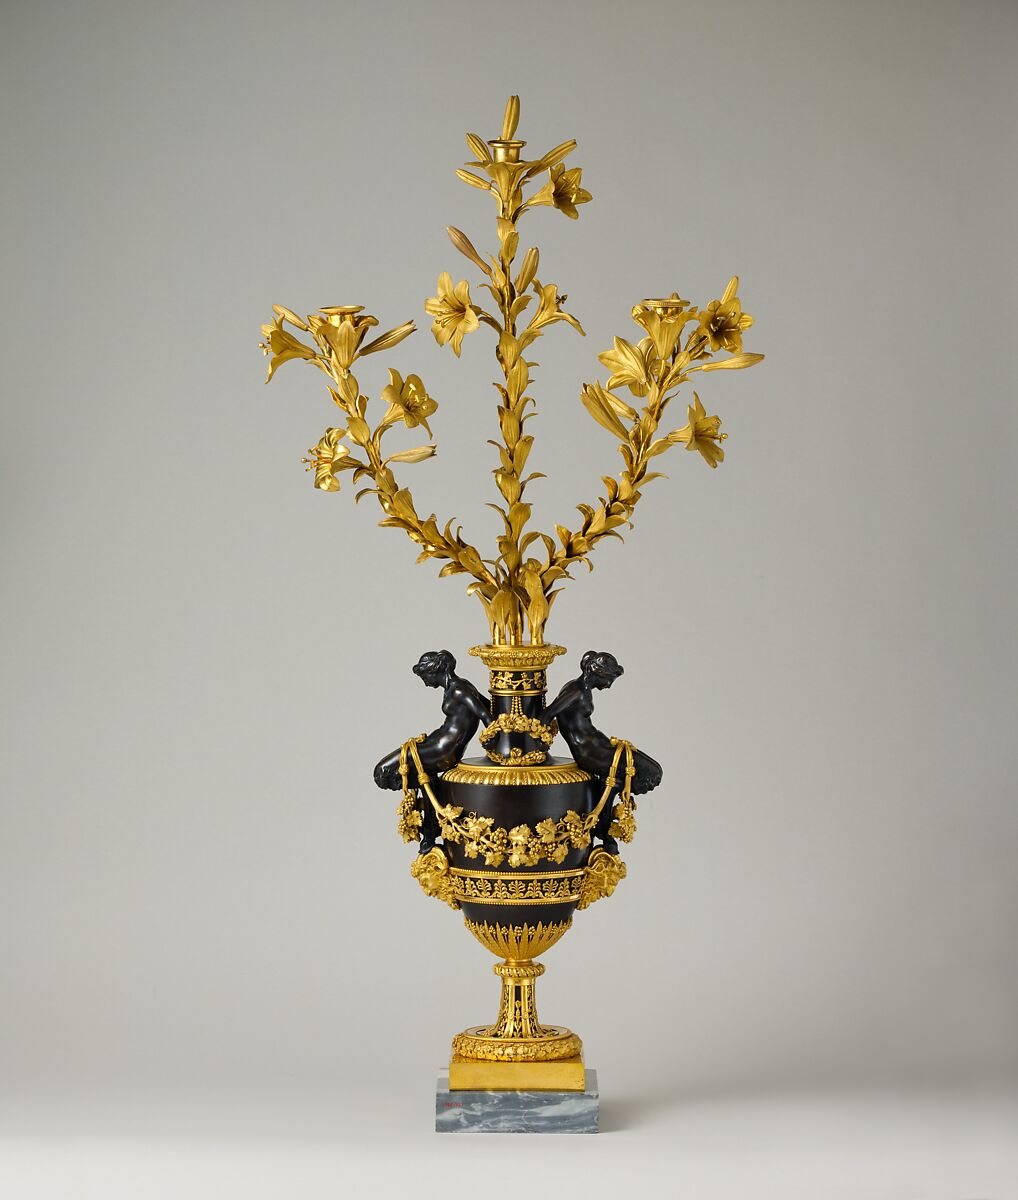 Three-light candelabrum (one of a pair), Patinated and gilt-bronze, enameled bronze, marble, French 